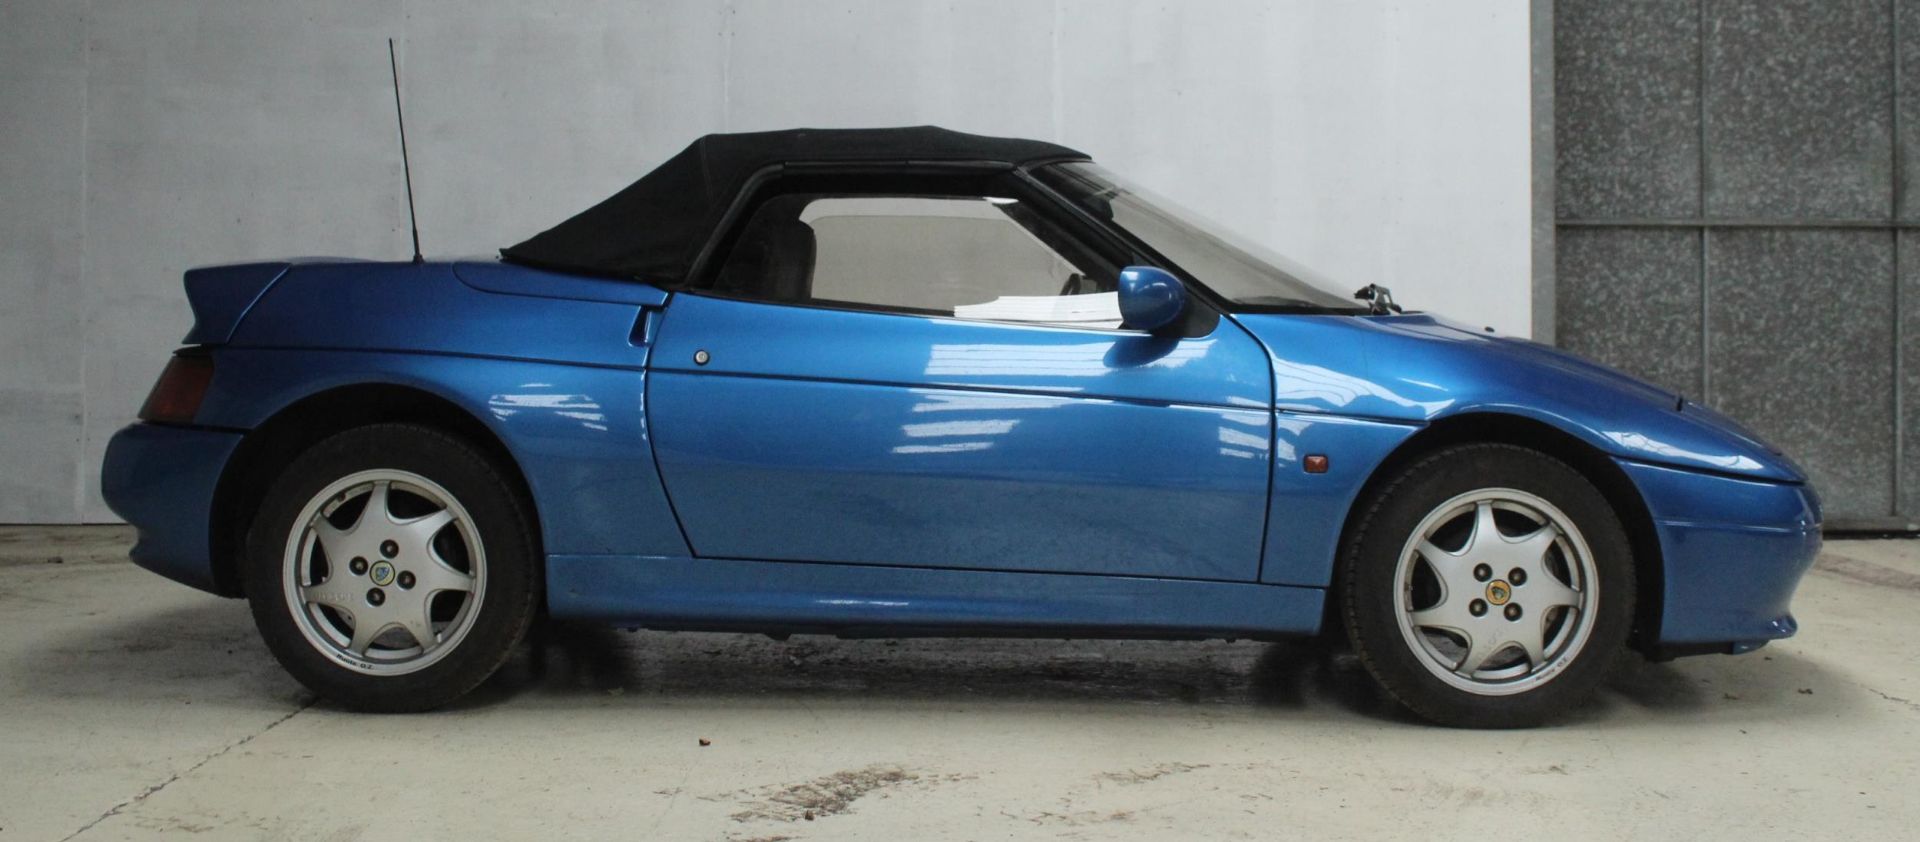 LOTUS ELAN SE TURBO CONVERTABLE H185UJX FIRST REG 1990 WITH V5 APPROX 49000 MILES BEEN IN A